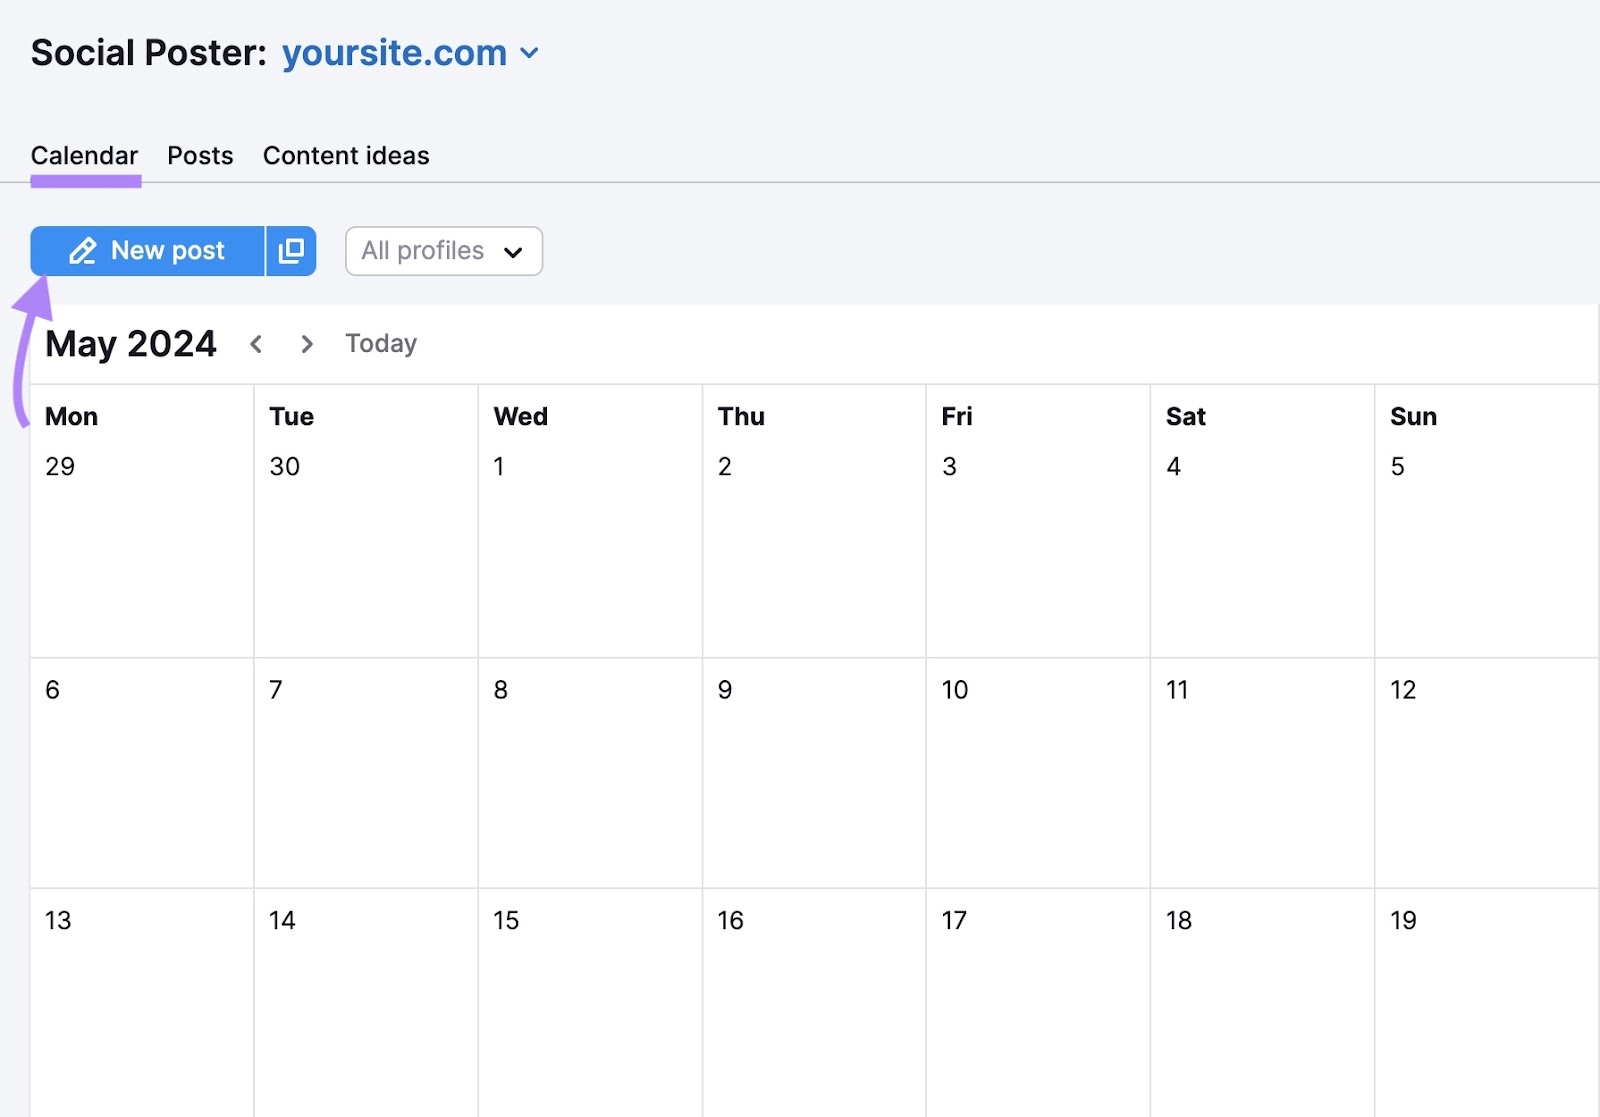 "Calendar" tab on "Social Poster" with the "New post" button clicked.